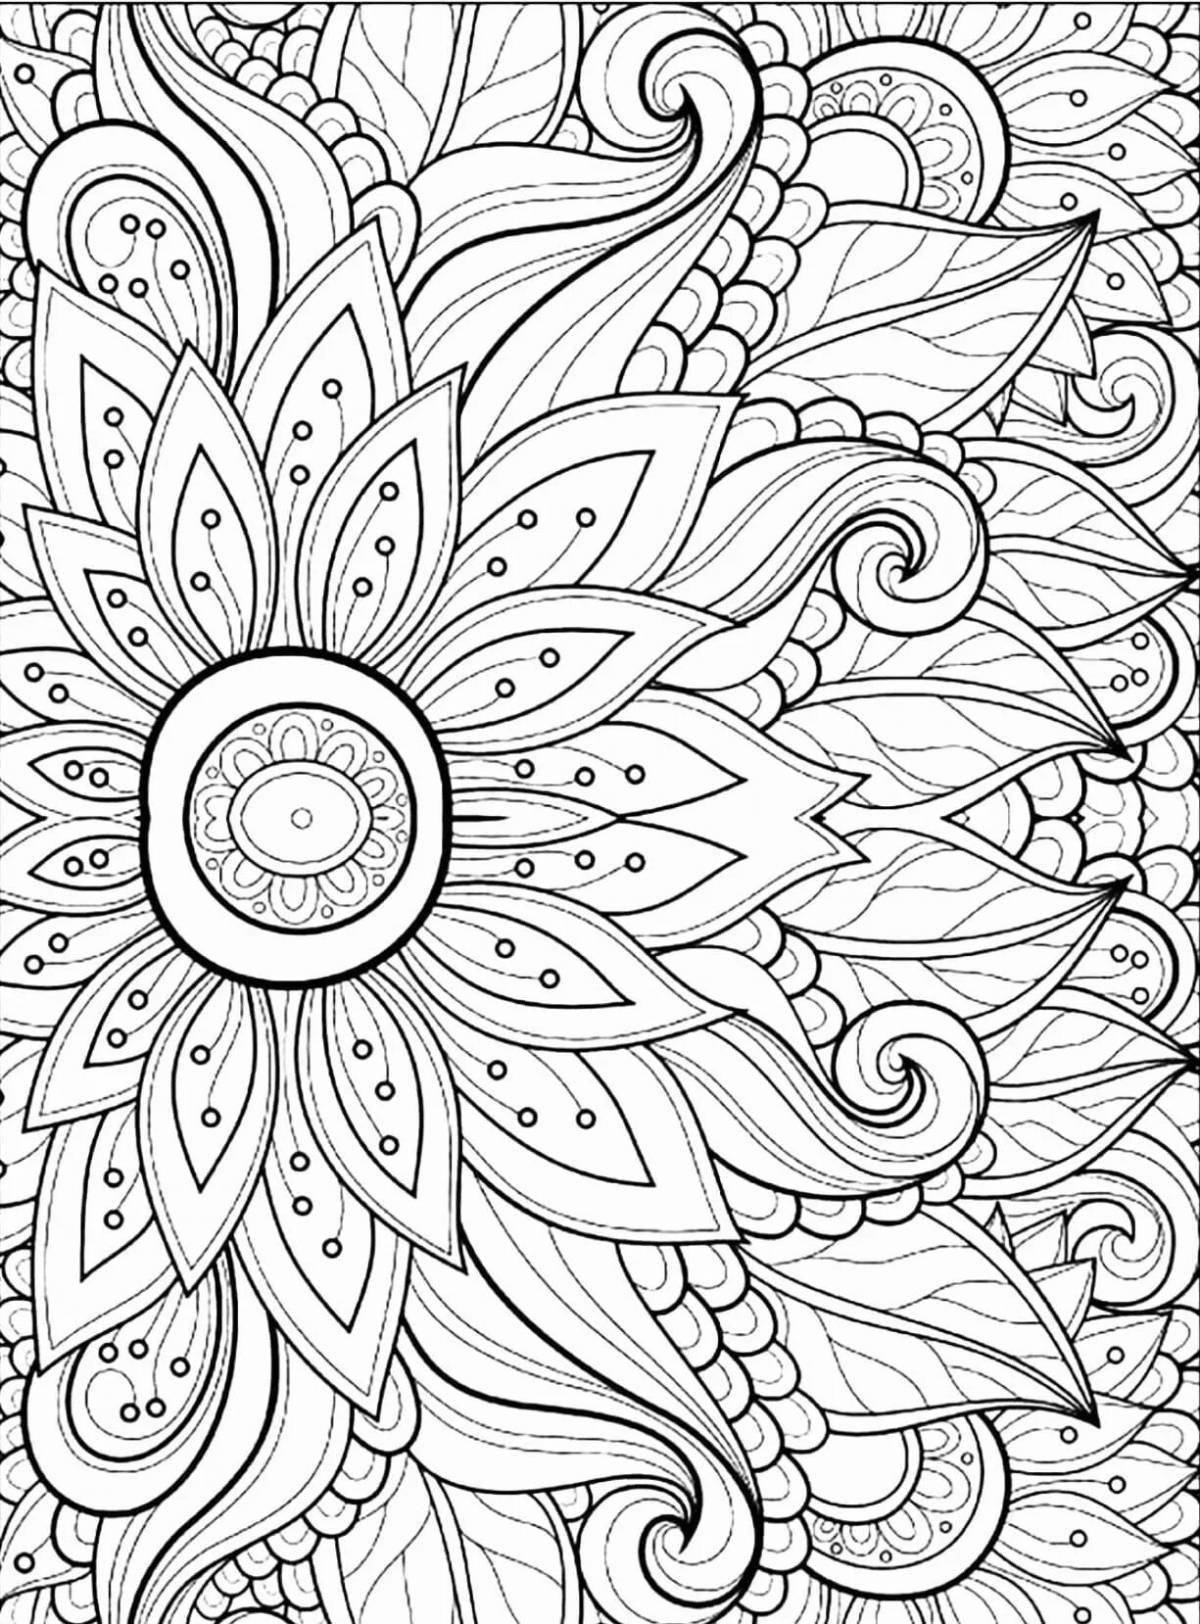 Serene coloring book for kids